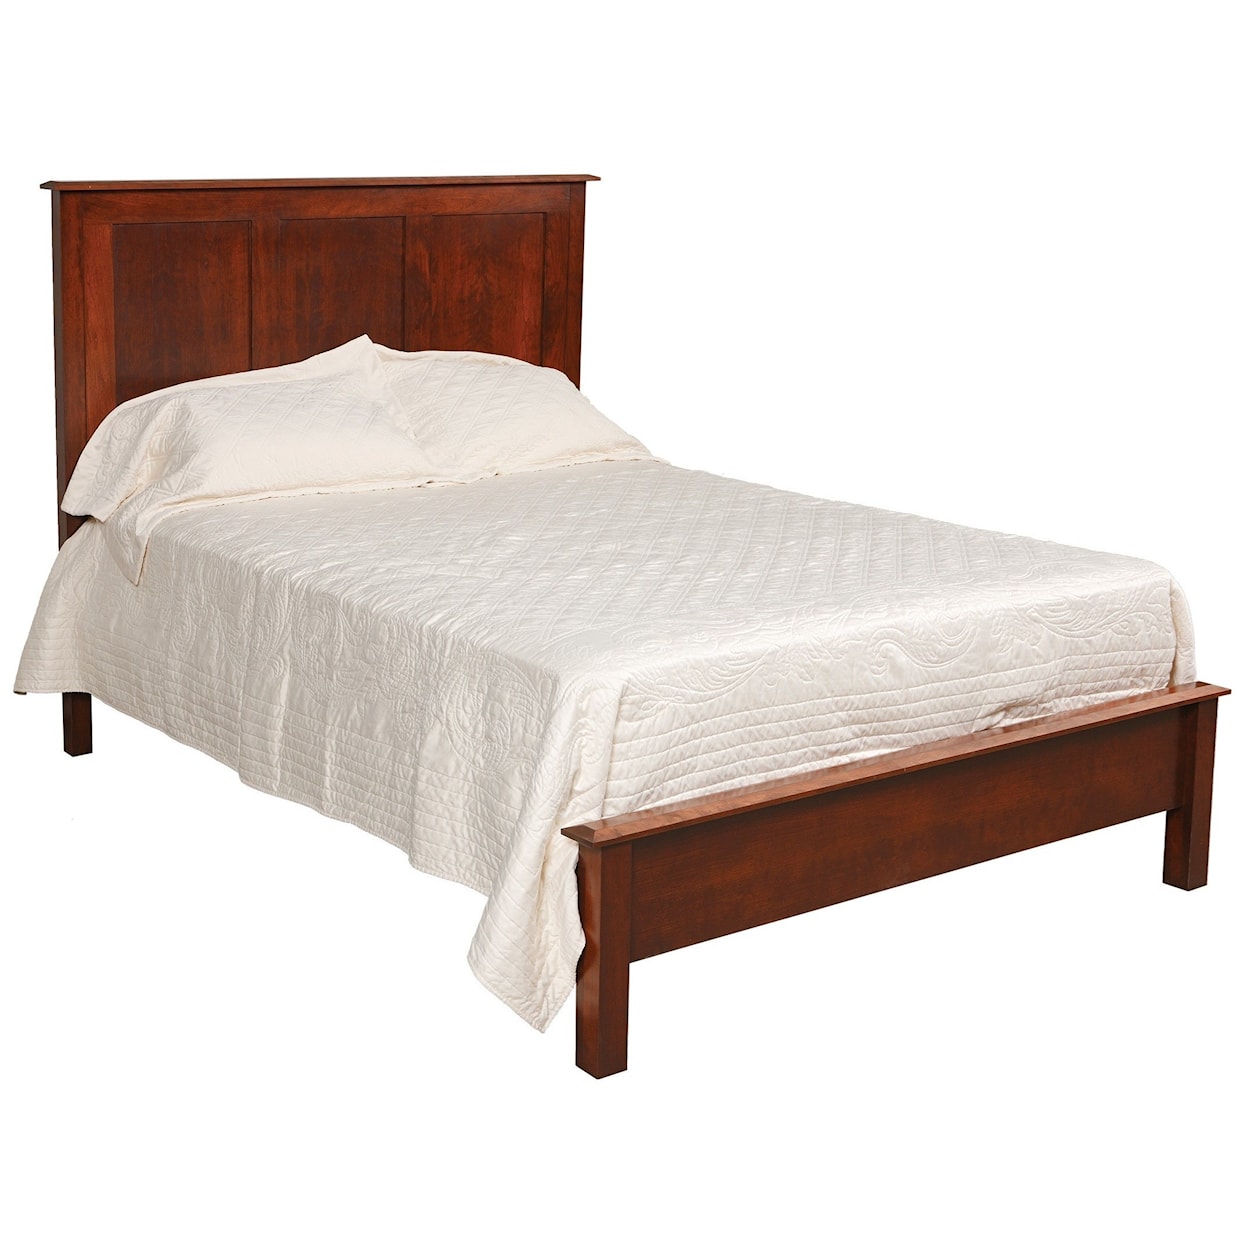 Daniels Amish Manchester Solid Wood Full Bed